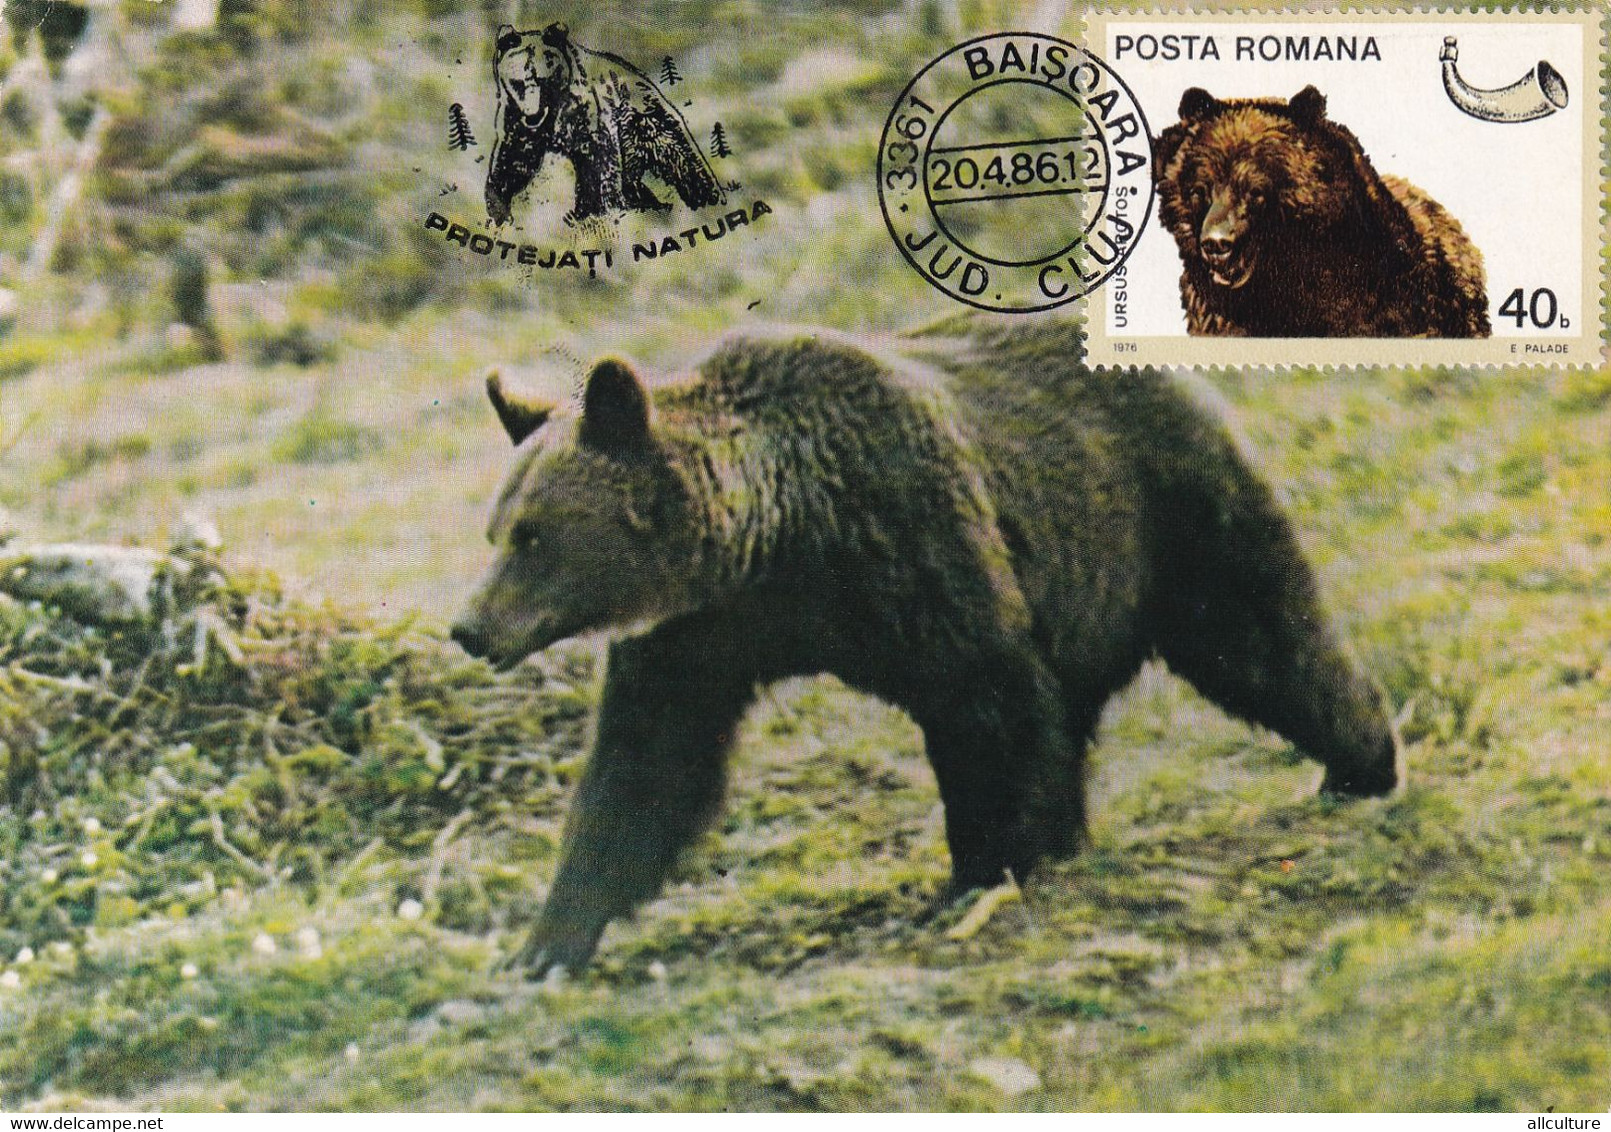 A9053- URSUS ARCTOS, BROWN BEAR, BAISOARA 1986 MAX CARD ROMANIA  USED STAMP ON BACK - Ours